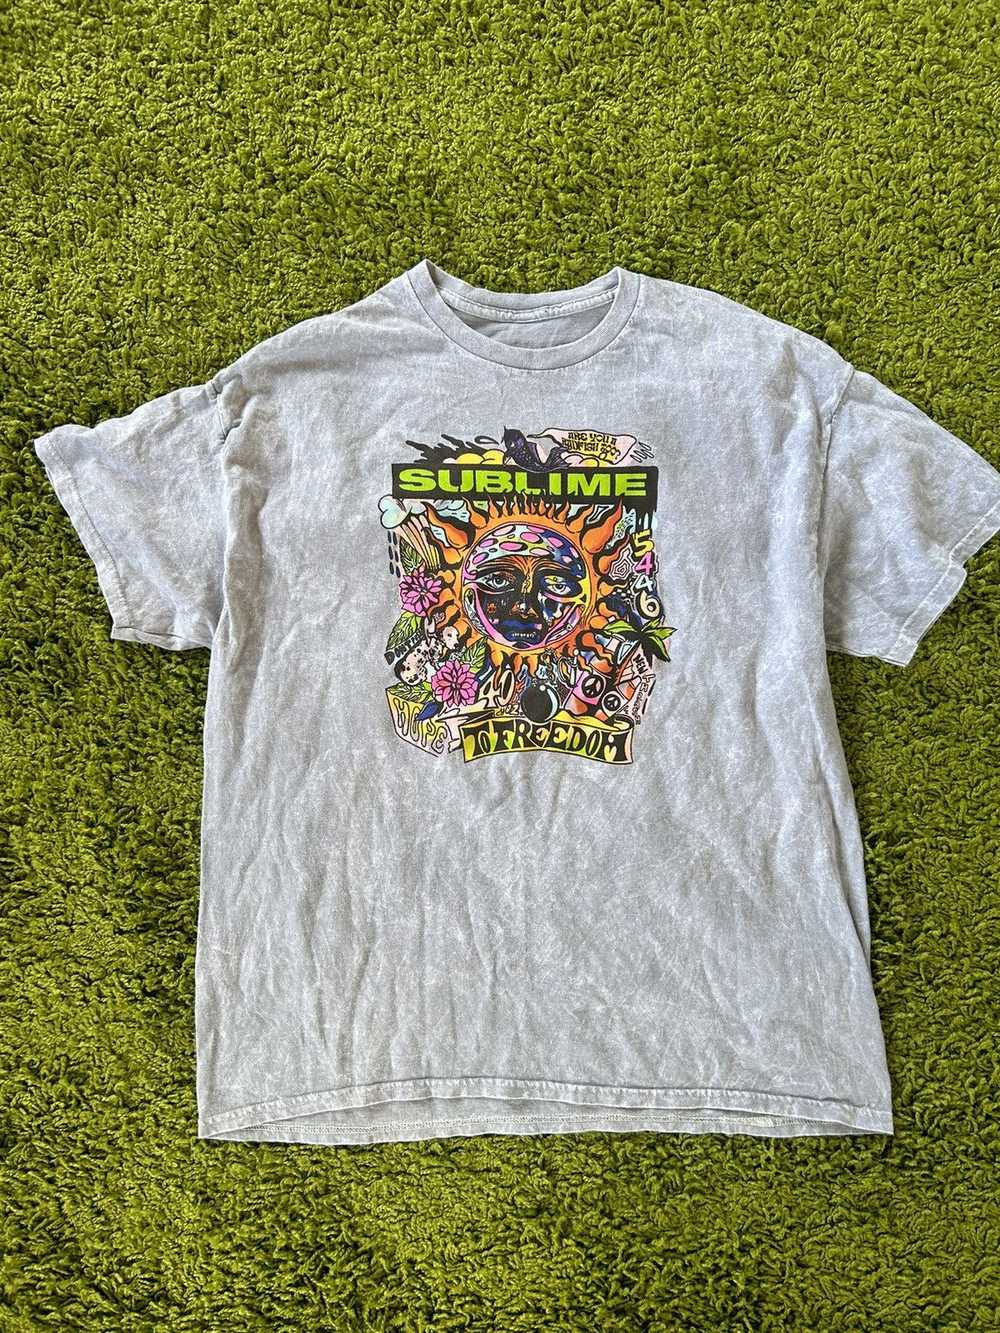 Sublime Sublime Tee - image 1